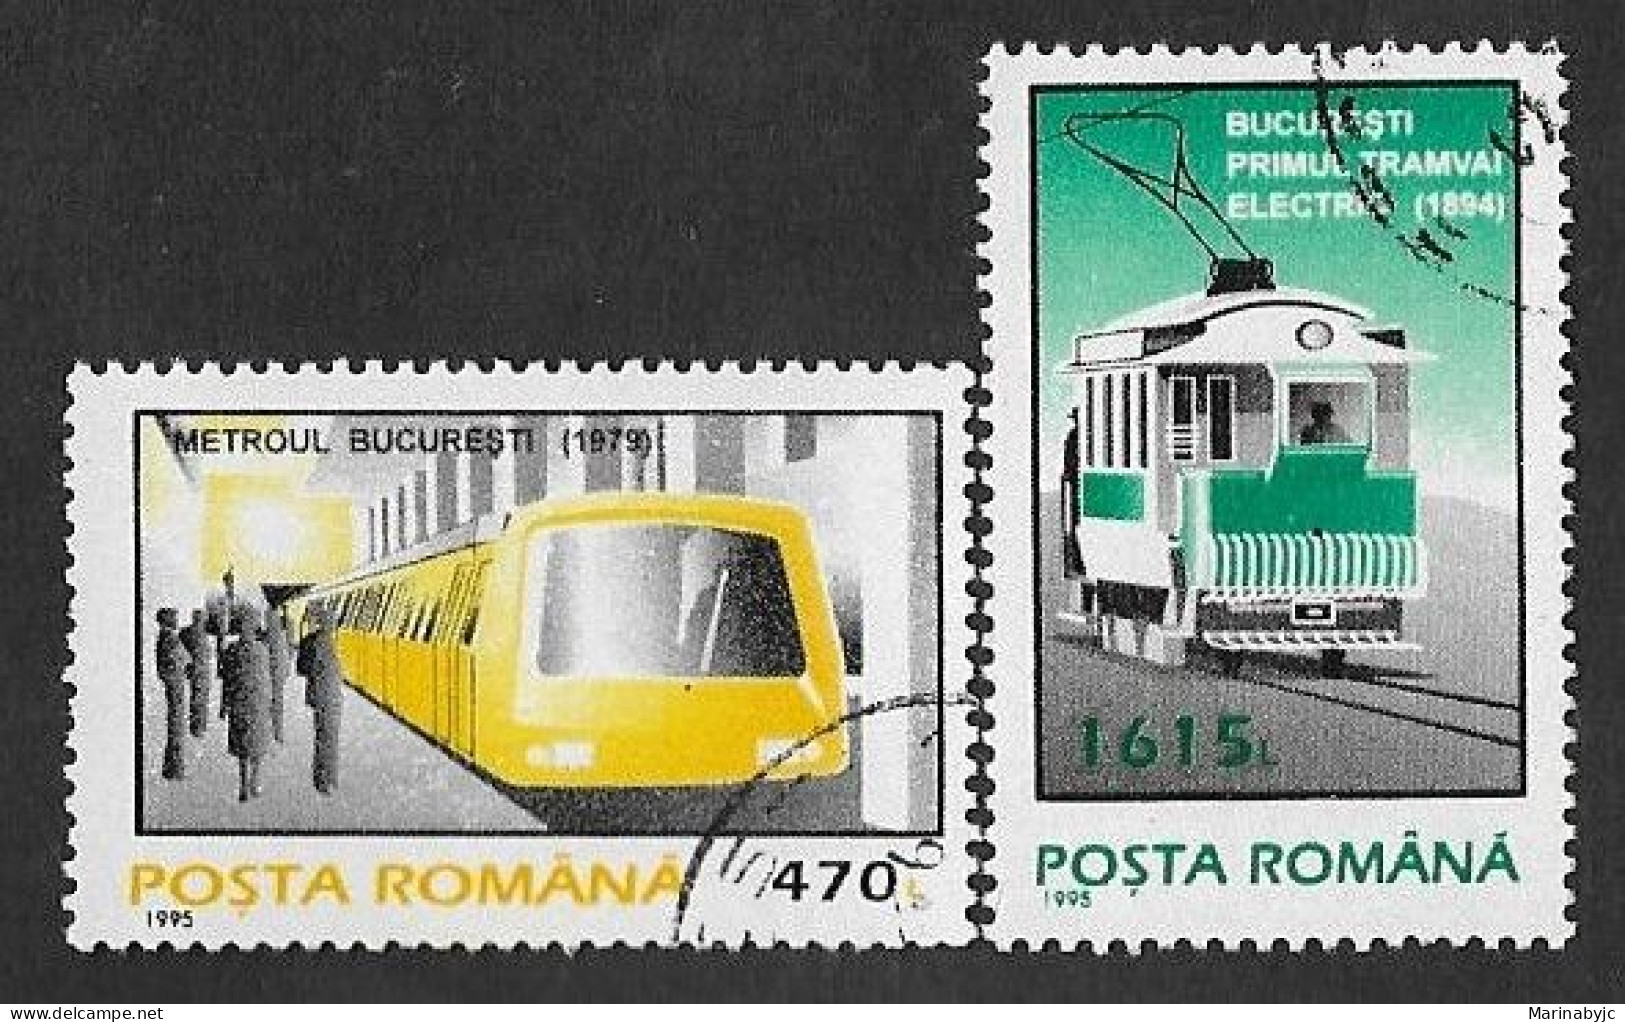 SE)1995 ROMANIA, FROM THE TRAINS SERIES, THE BUCHAREST METRO, 1ST ELECTRIC TRAIN, 2 CTO STAMPS - Used Stamps